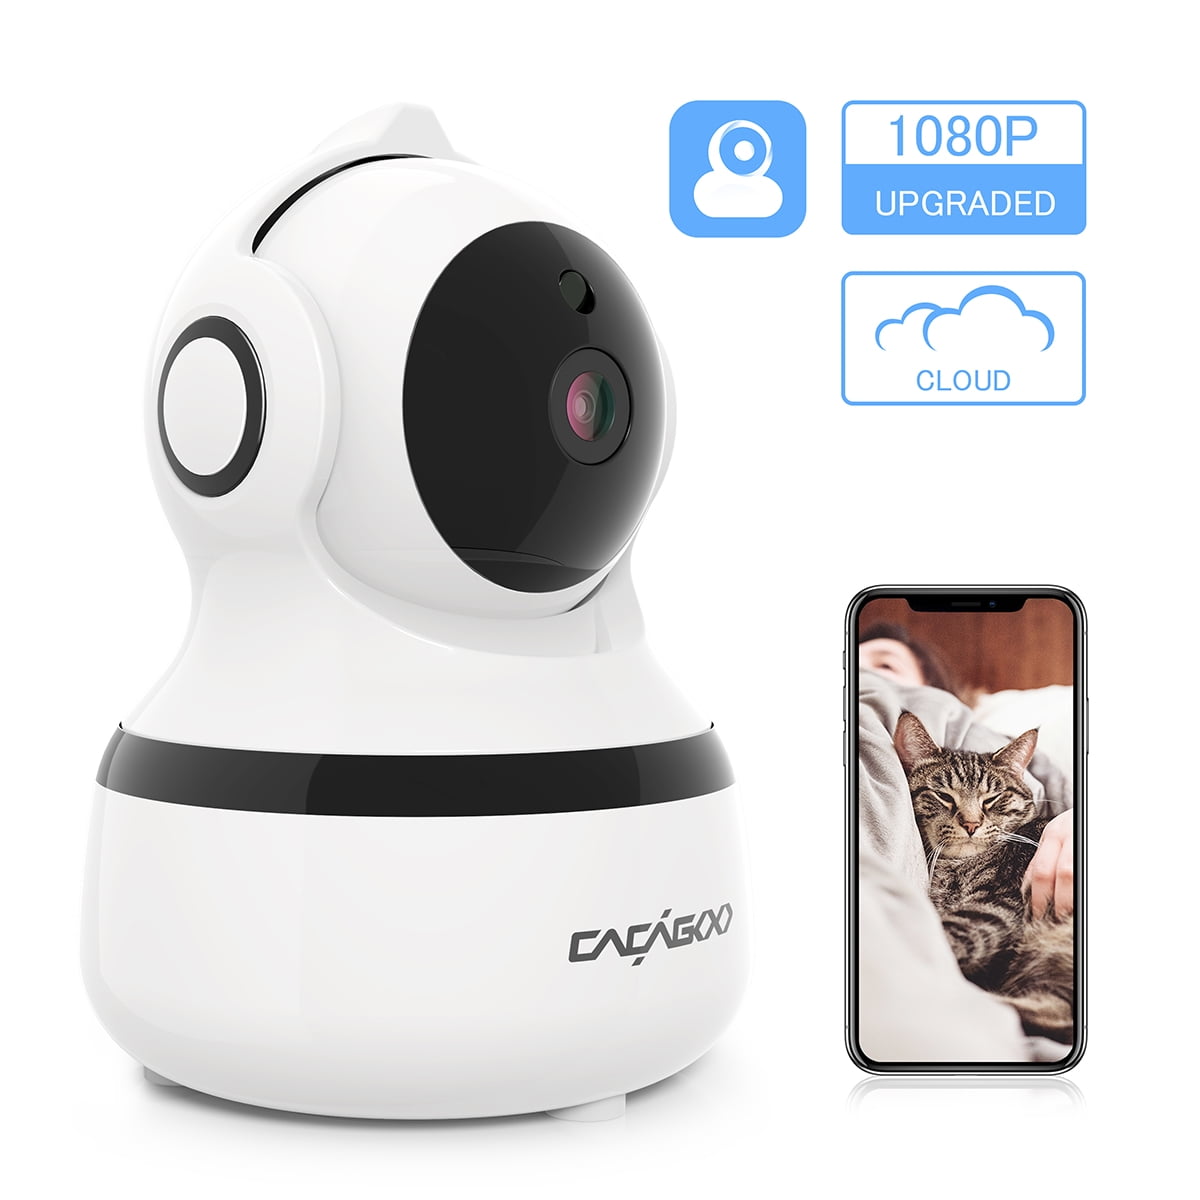  QSEE Indoor Security Camera, 3MP WiFi Camera Baby Monitor,  2-Way Audio, Call Button, Human & Pet Detection, Motion Tracking, Night  Vision, Pan/Tilt Wireless IP Camera, Smart Home (Hestia 3T) 